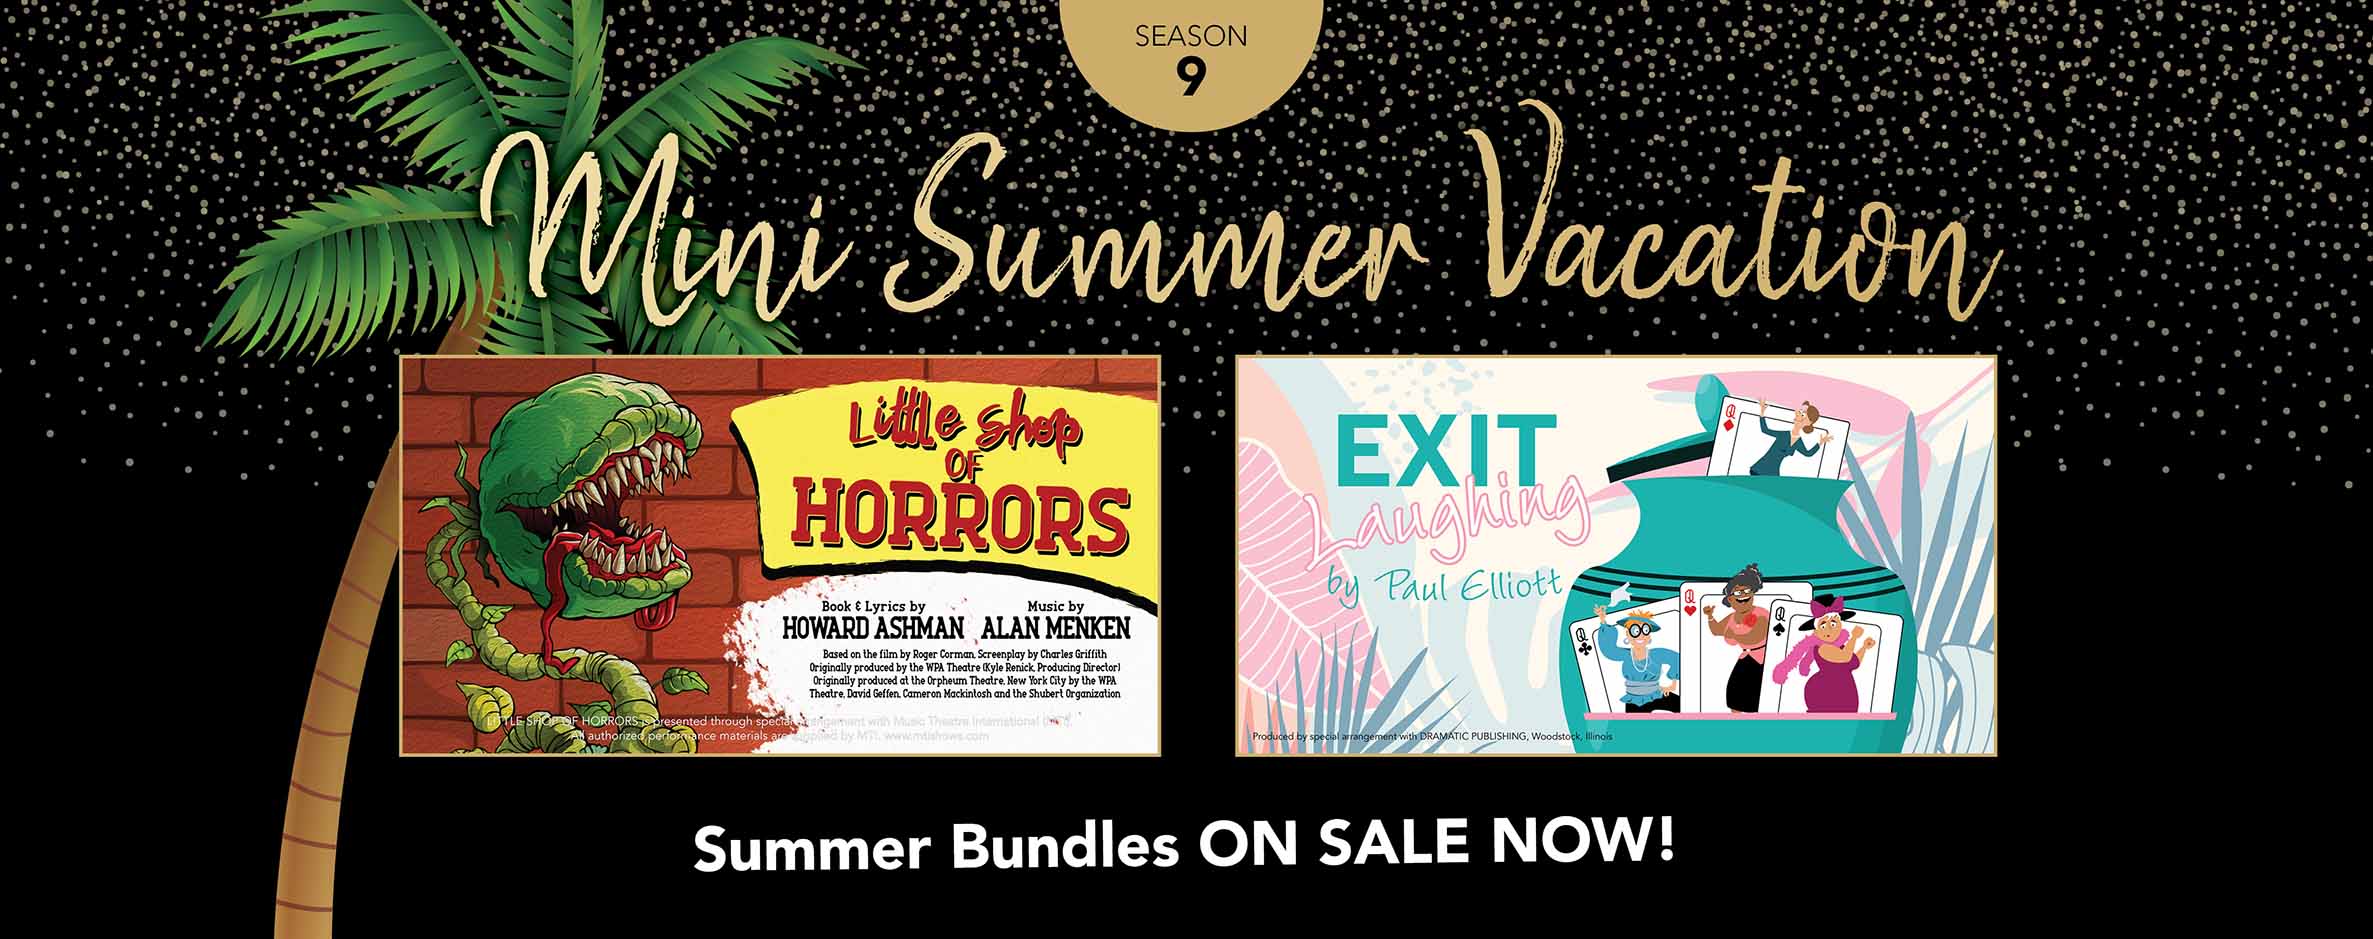 Mini Summer Vacation: Learn how to save with Mini Summer Vacation Bundles!